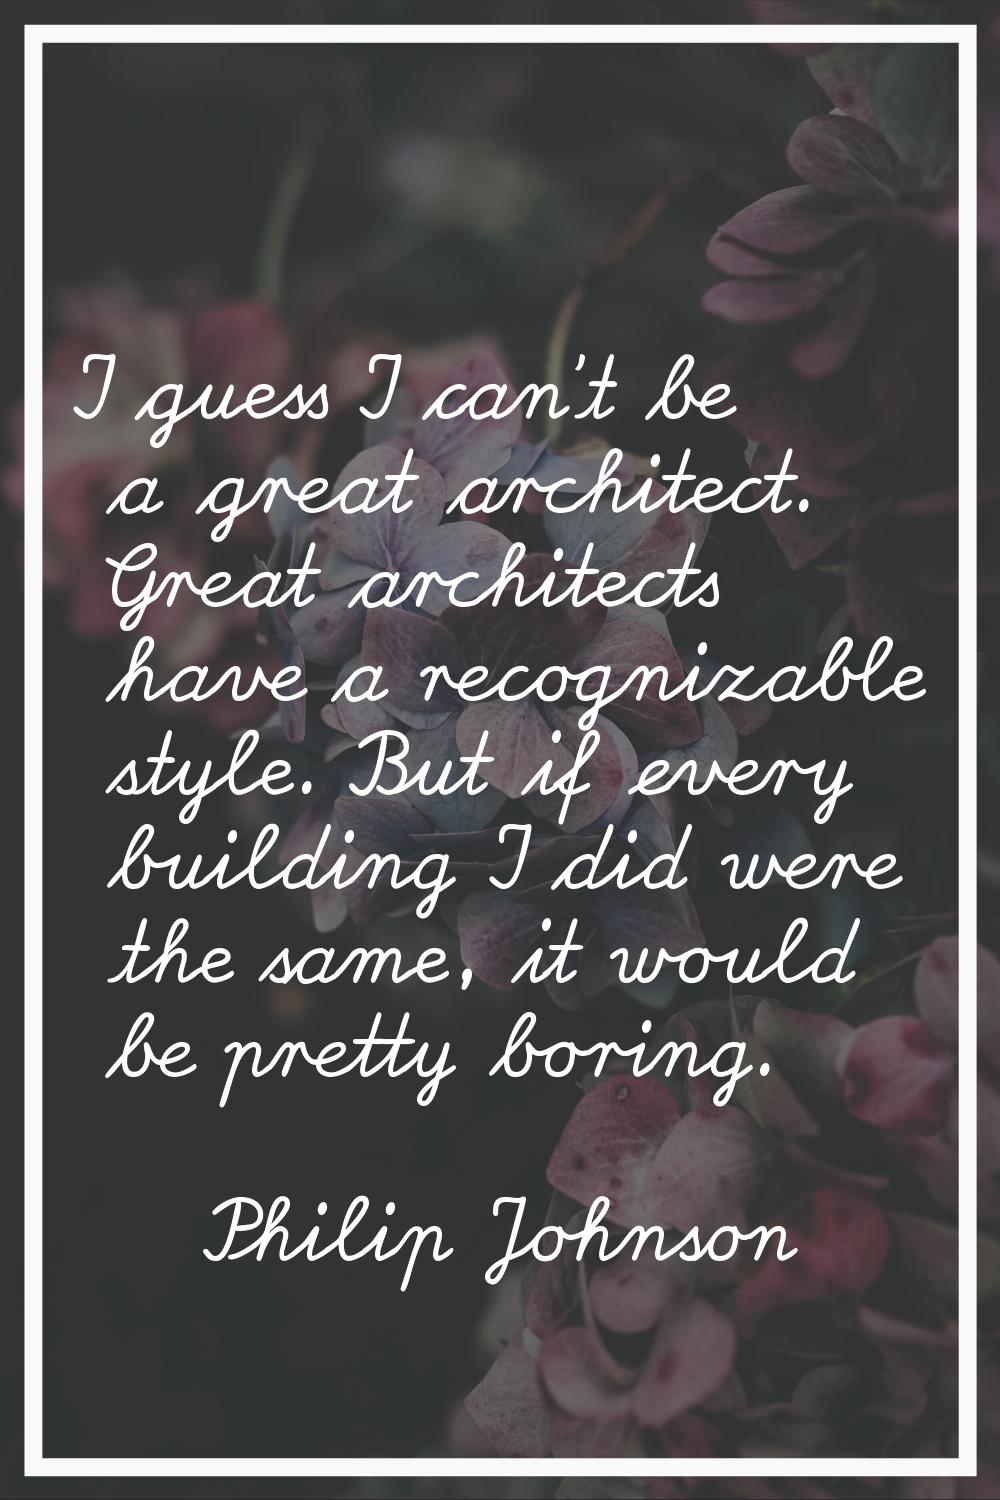 I guess I can't be a great architect. Great architects have a recognizable style. But if every buil